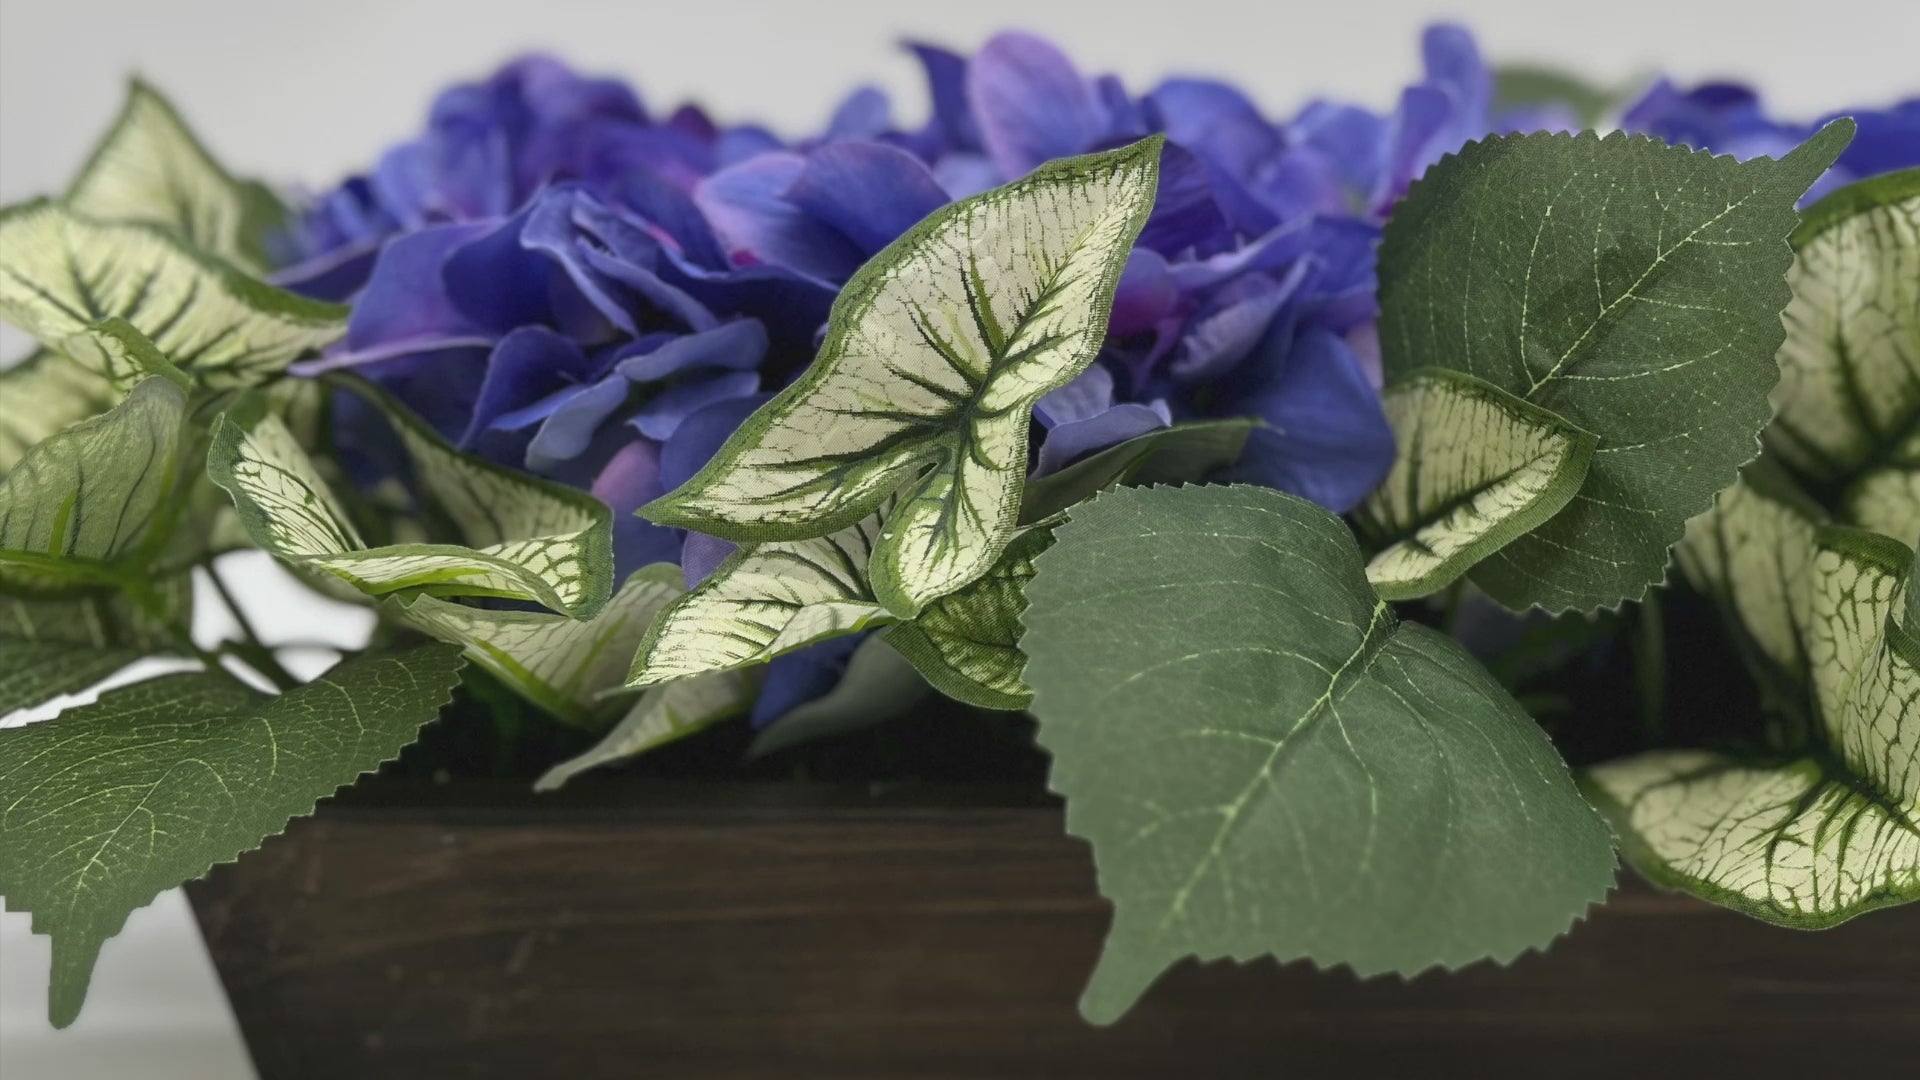 Lifelike Beauty in a Box: Blue Hydrangeas and Variegated Syngonium Leaves